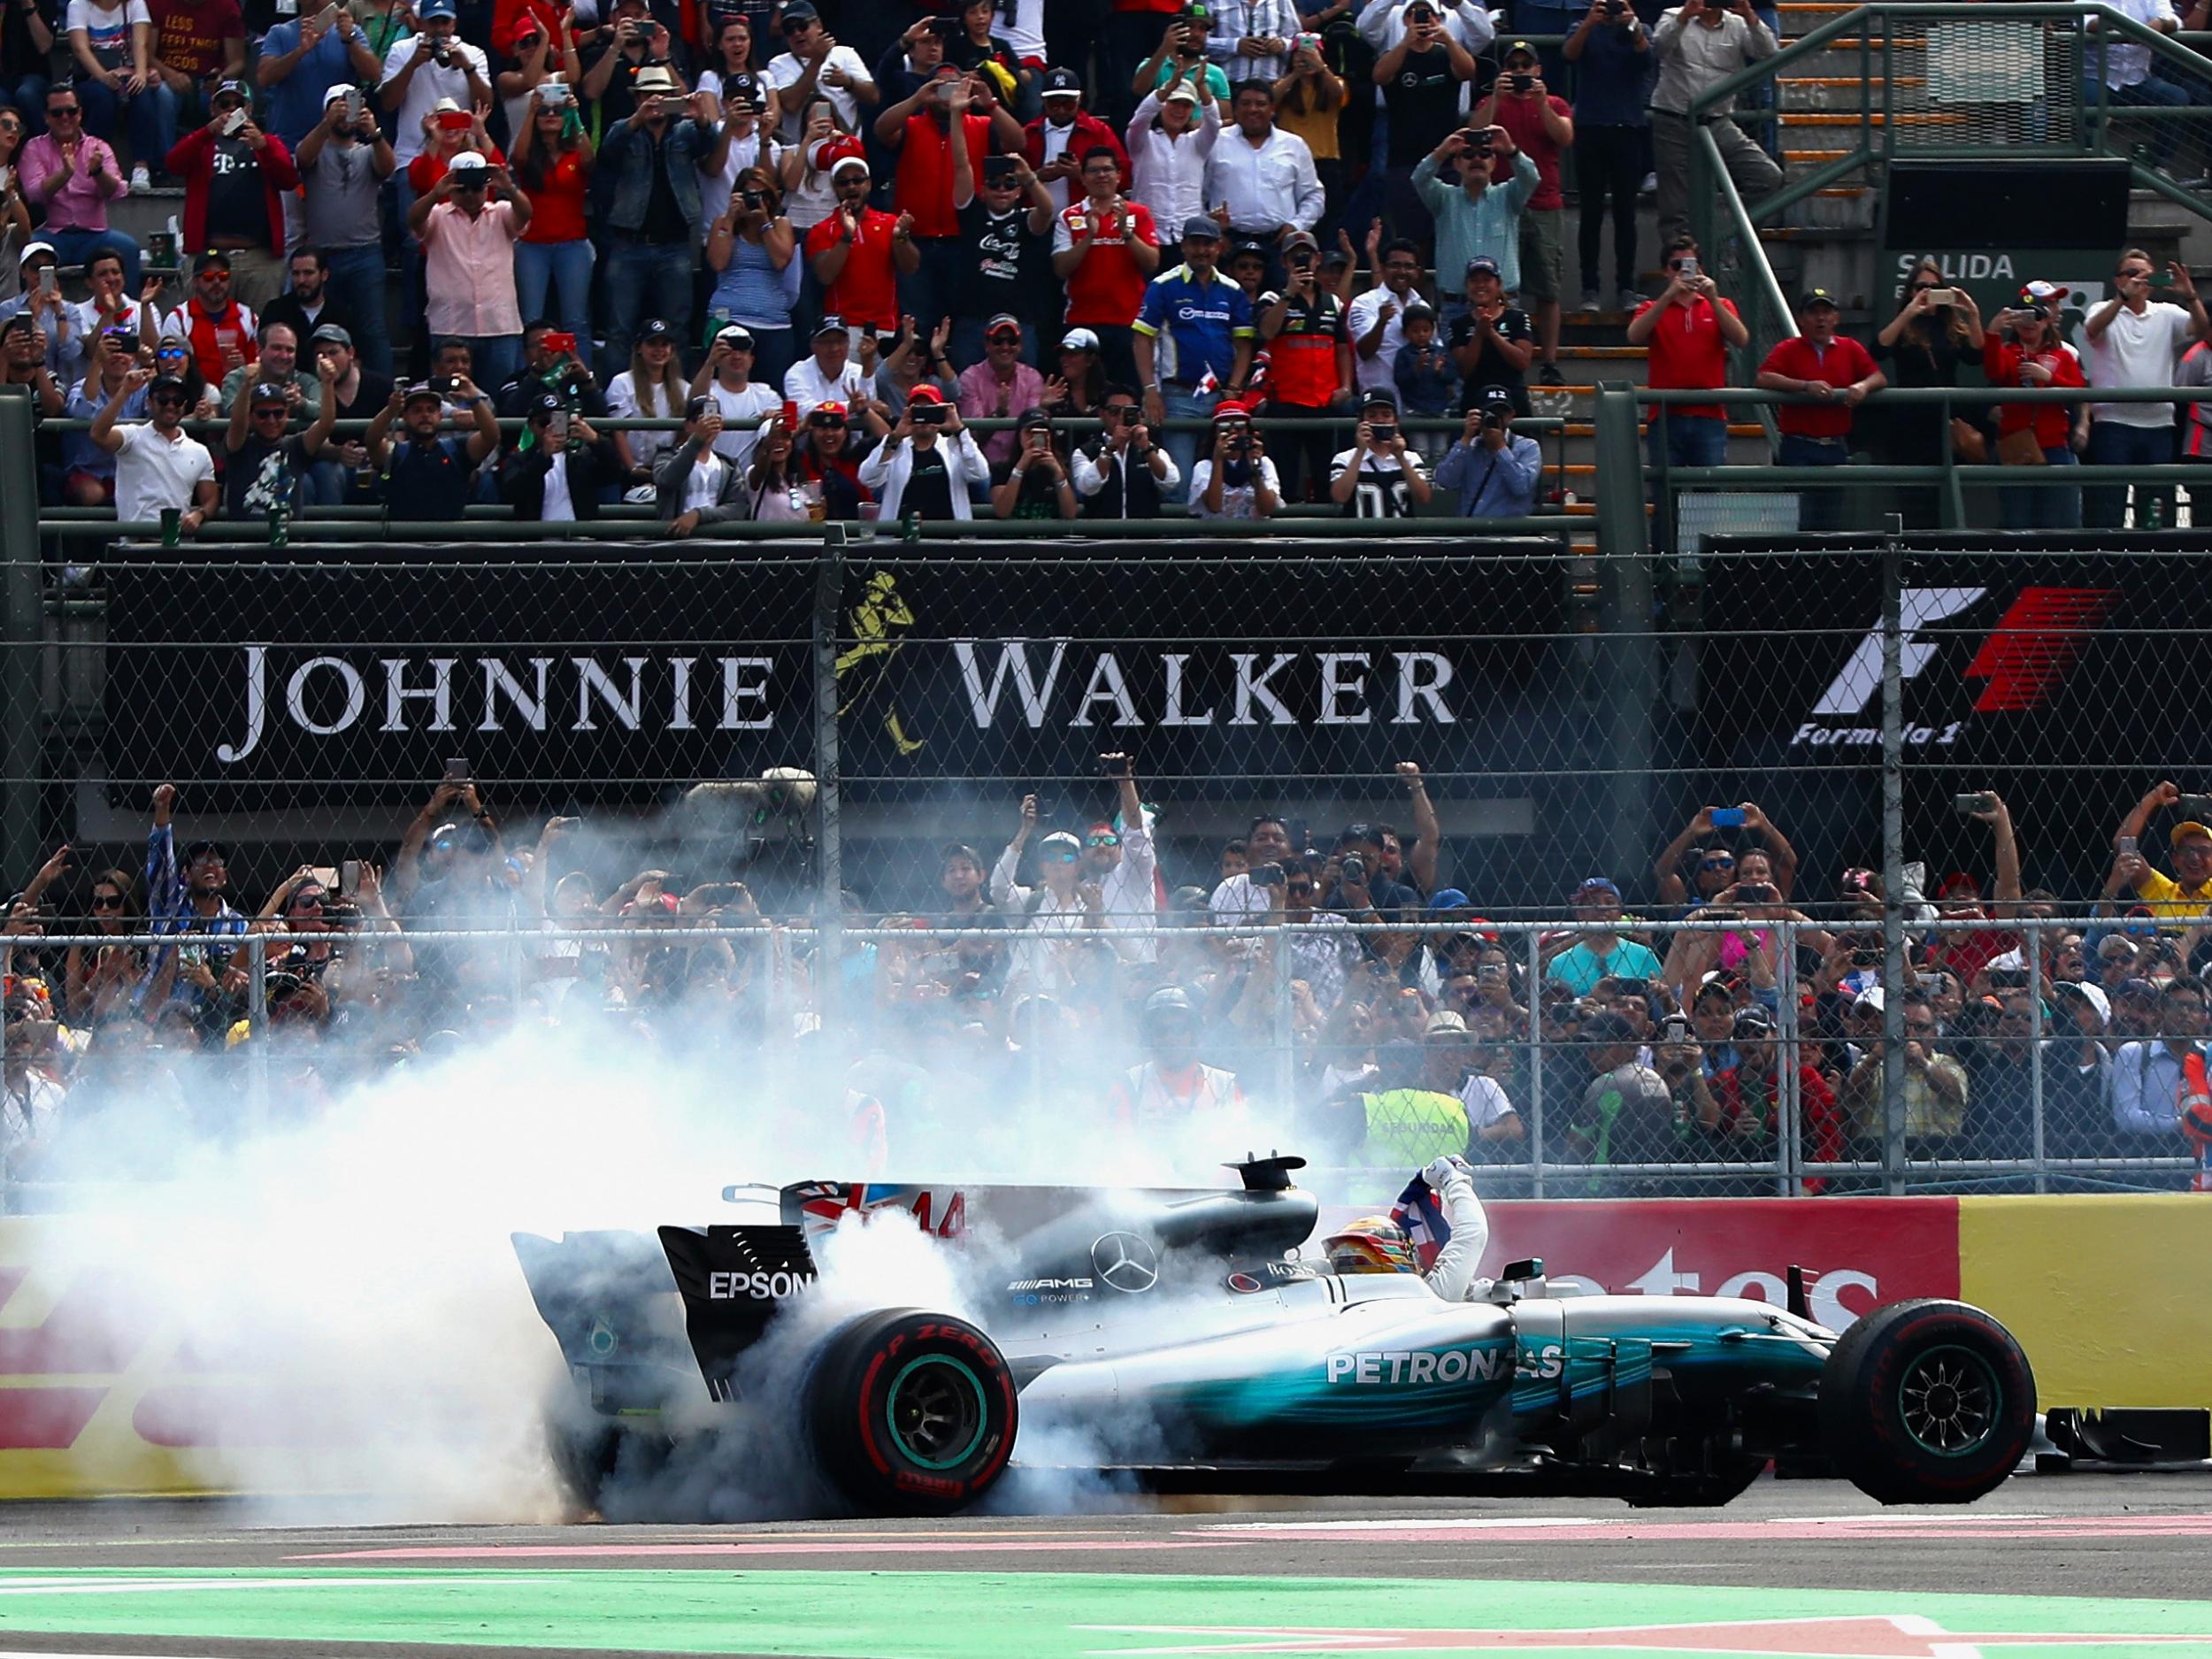 Hamilton celebrated with donuts in front of the Mexican crowd